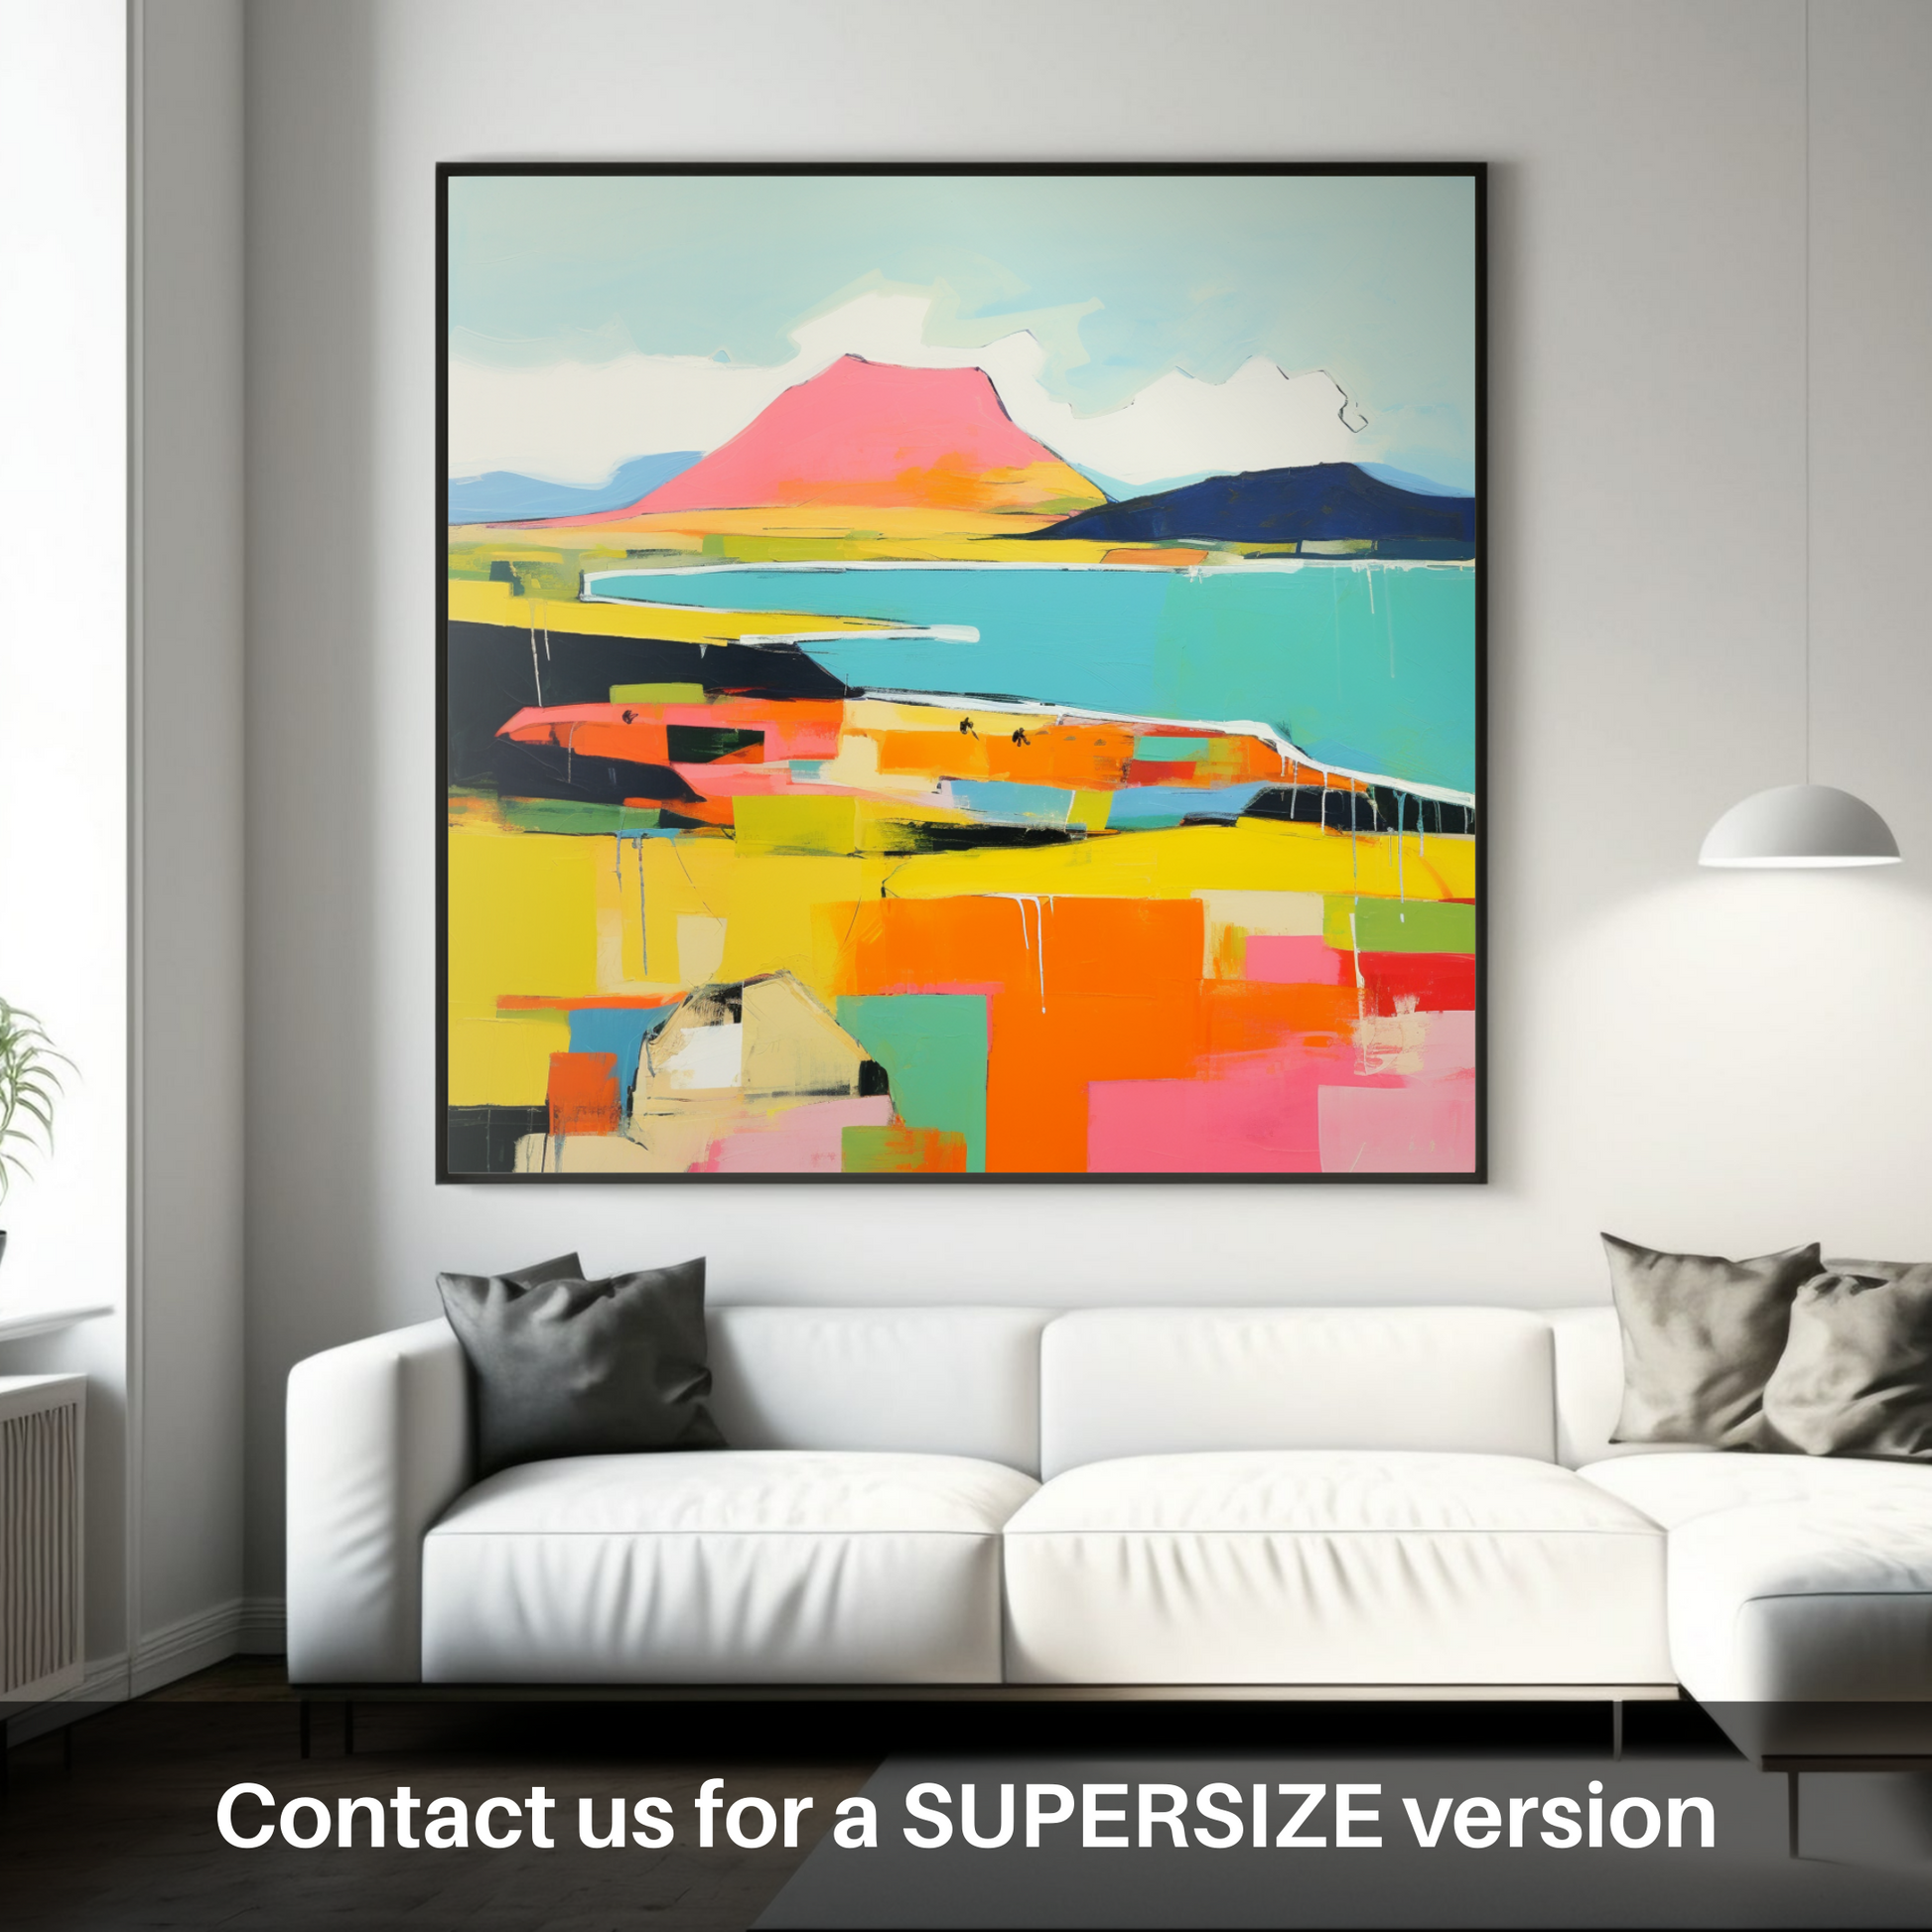 Huge supersize print of Isle of Arran, Firth of Clyde in summer